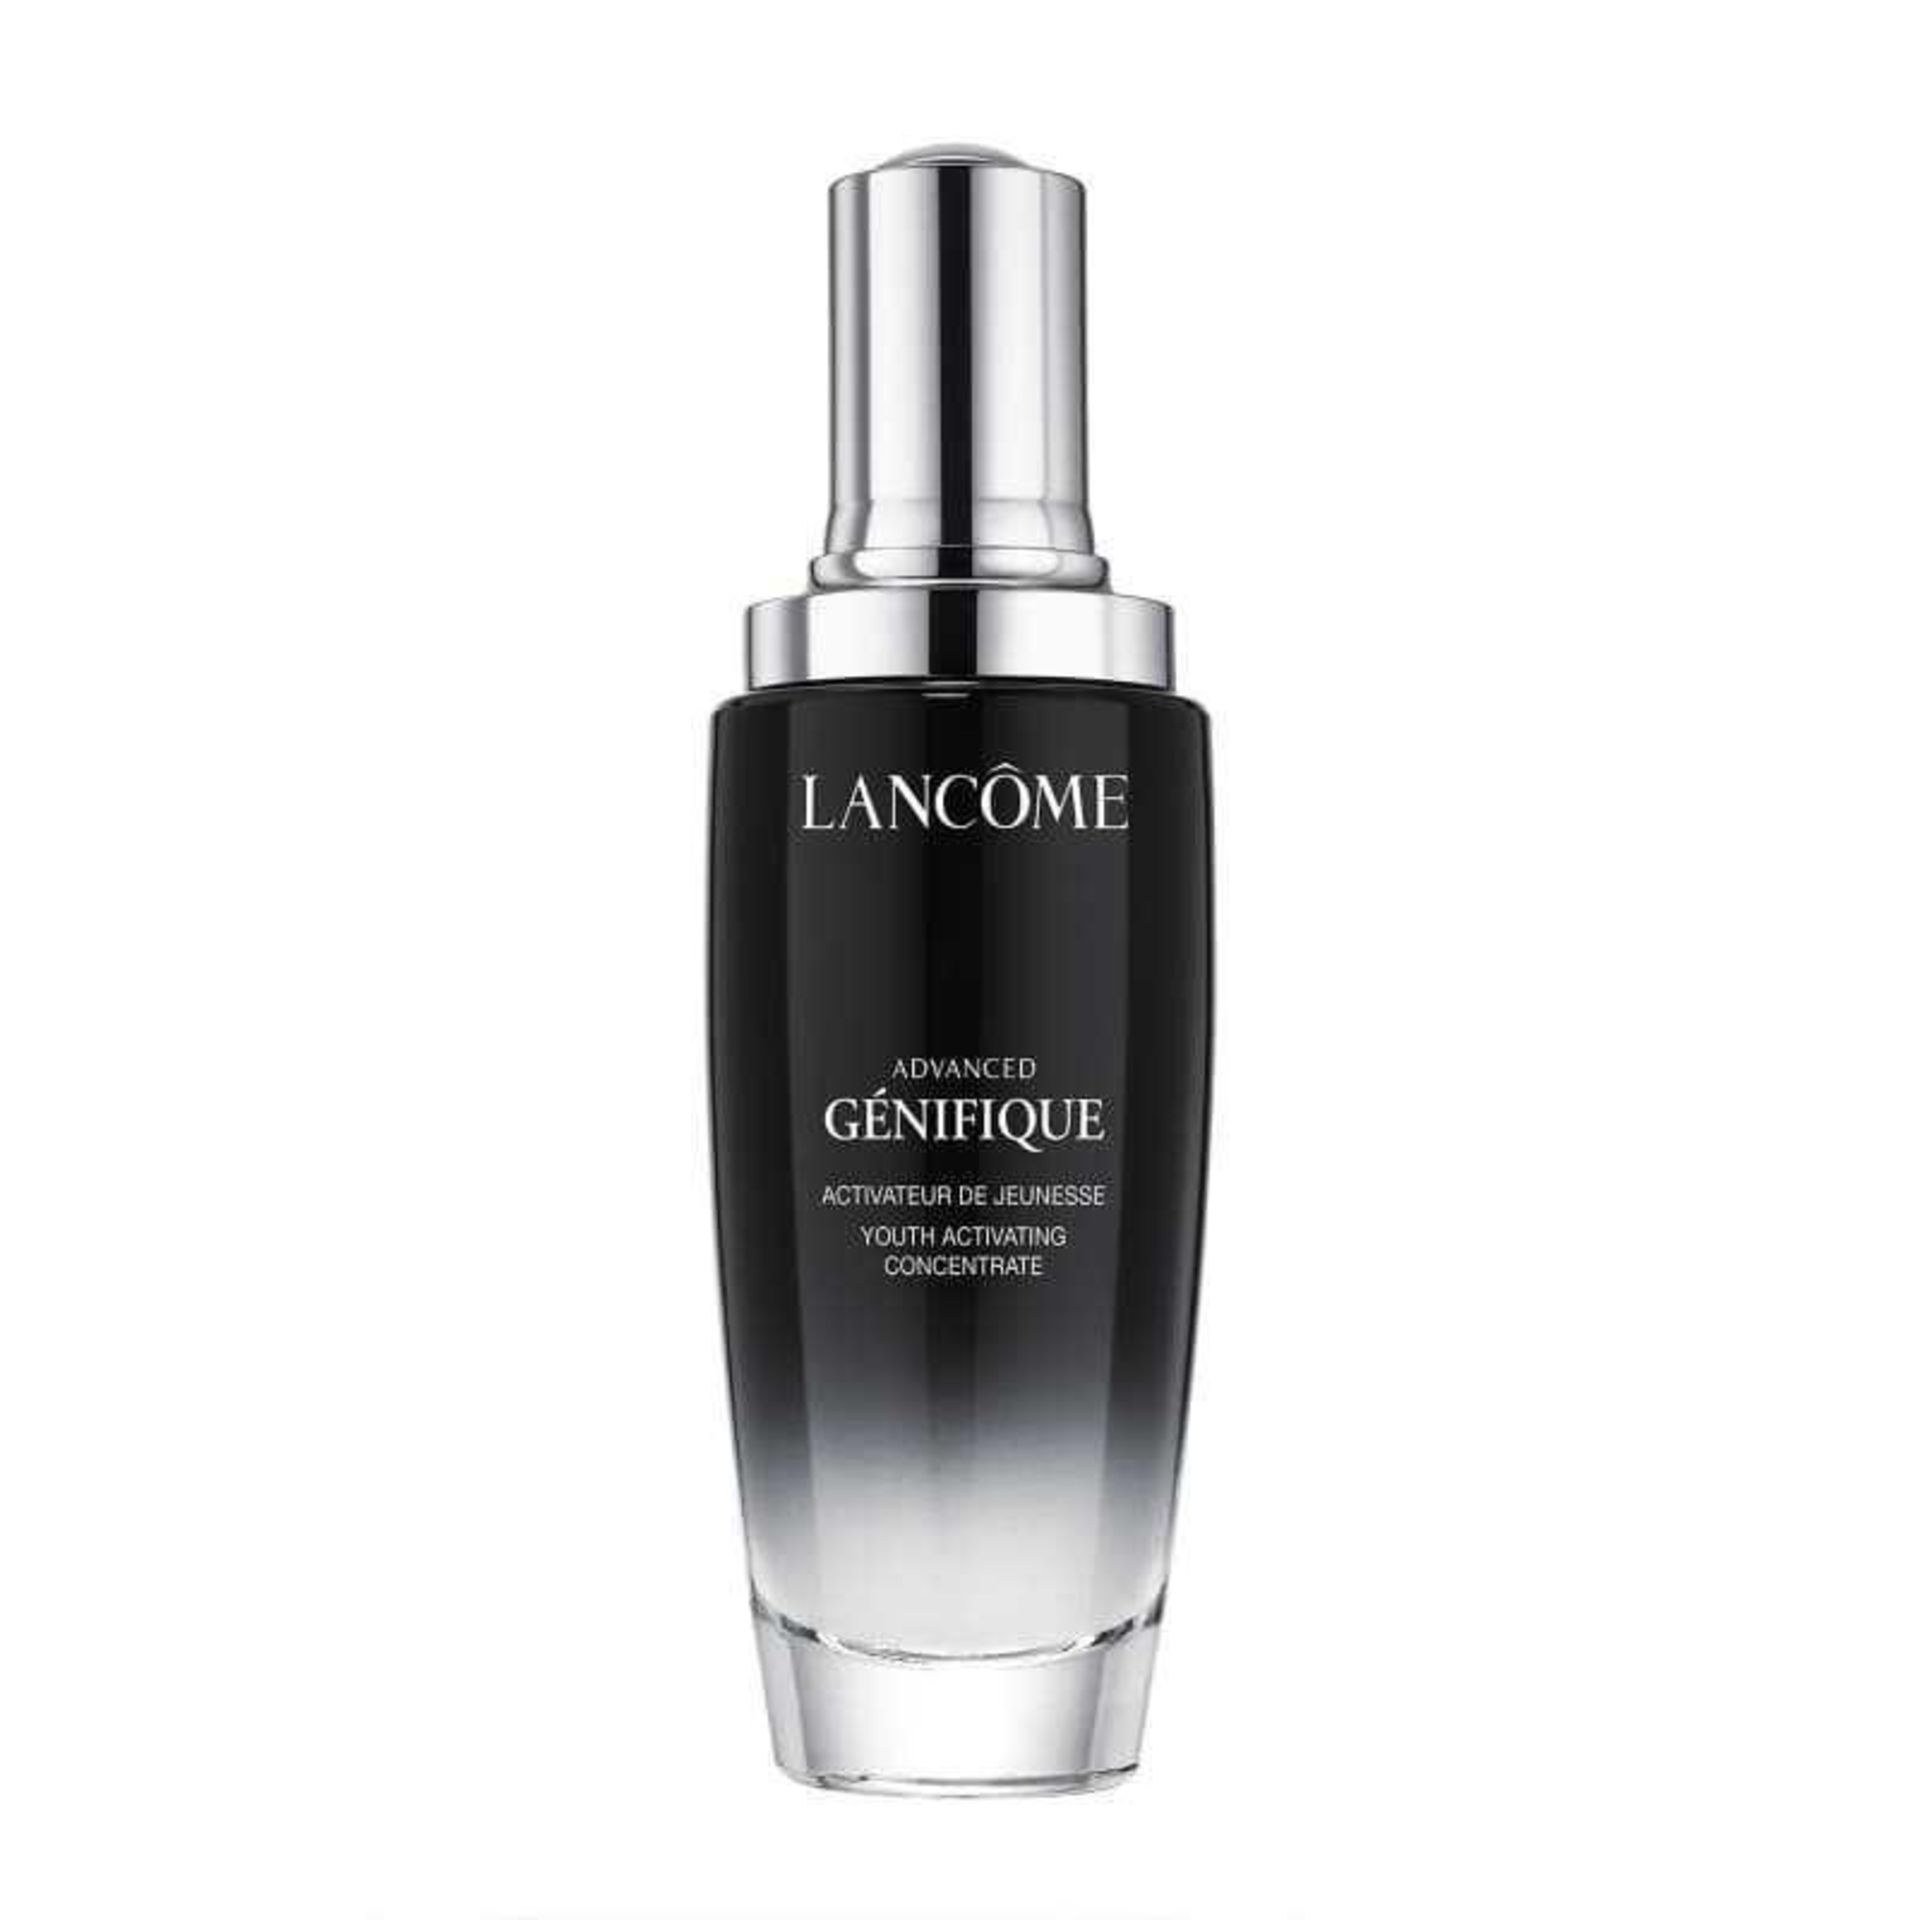 RRP £50 Brand New Boxed And Sealed Tester Of Lancôme Paris Advanced Genifique Youth Activating Conce - Image 3 of 3